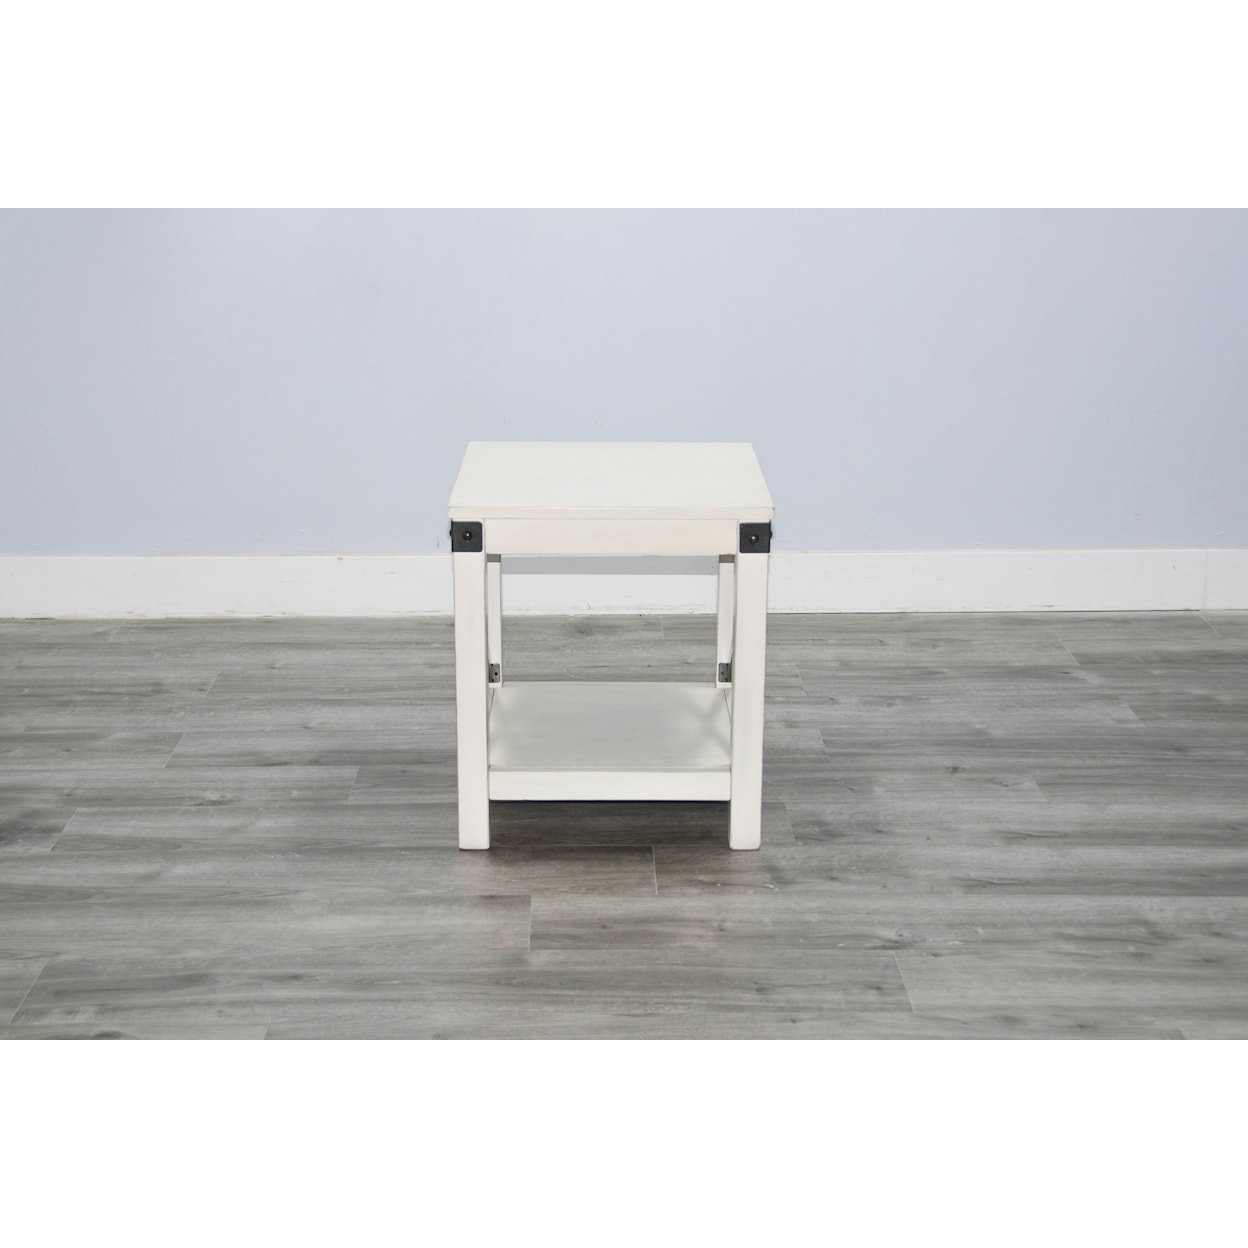 Sunny Designs Bayside Square End Table